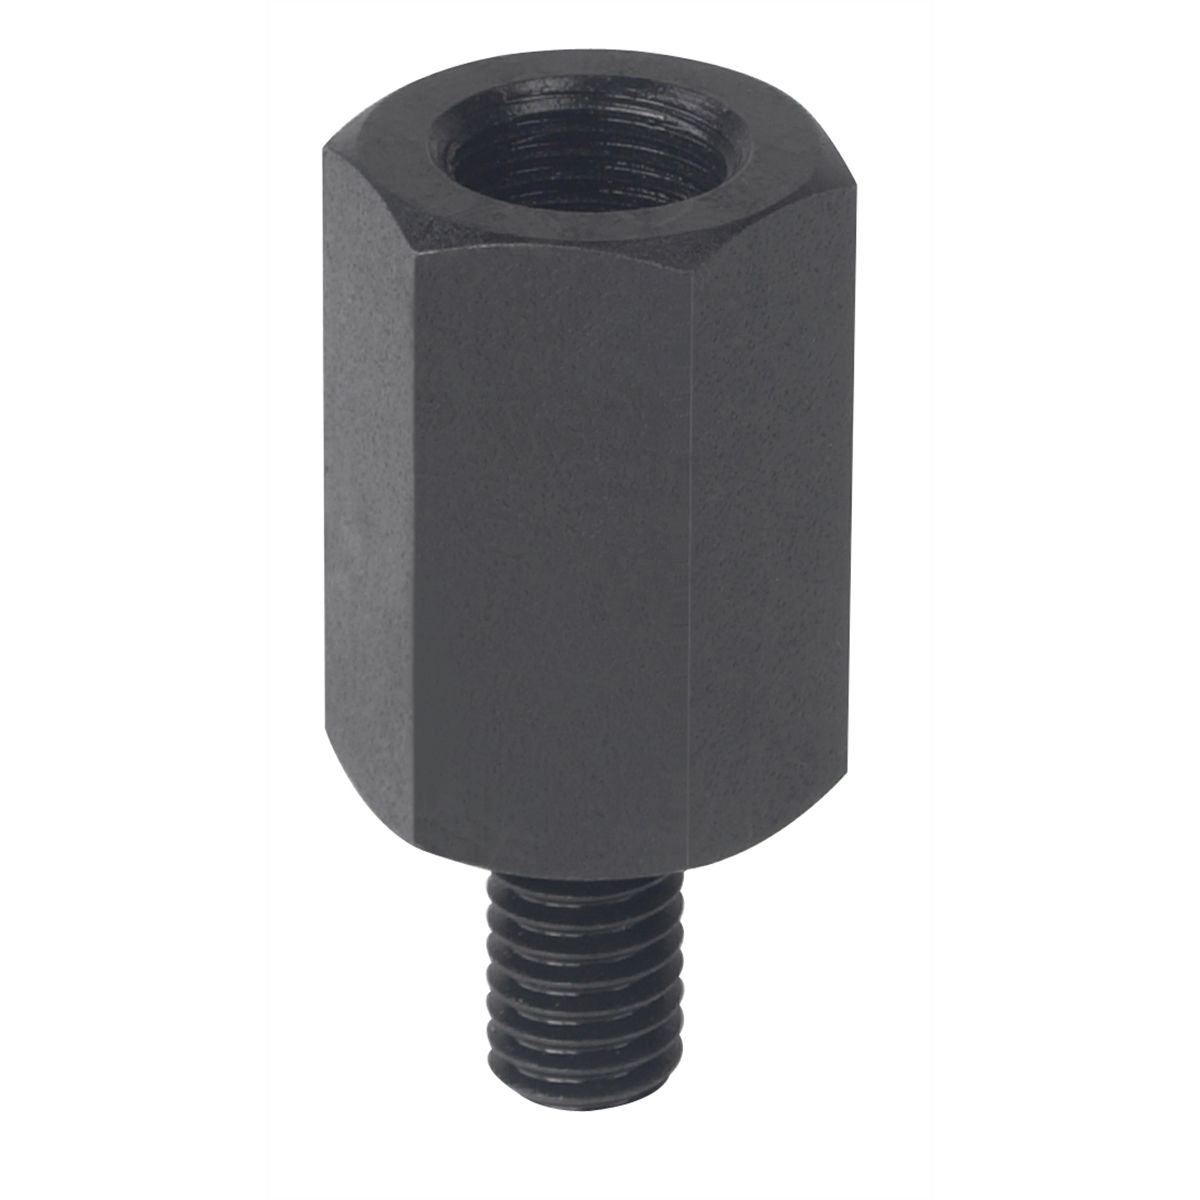 Puller Adapter 5/8-18 Female To 1/4-20 Male